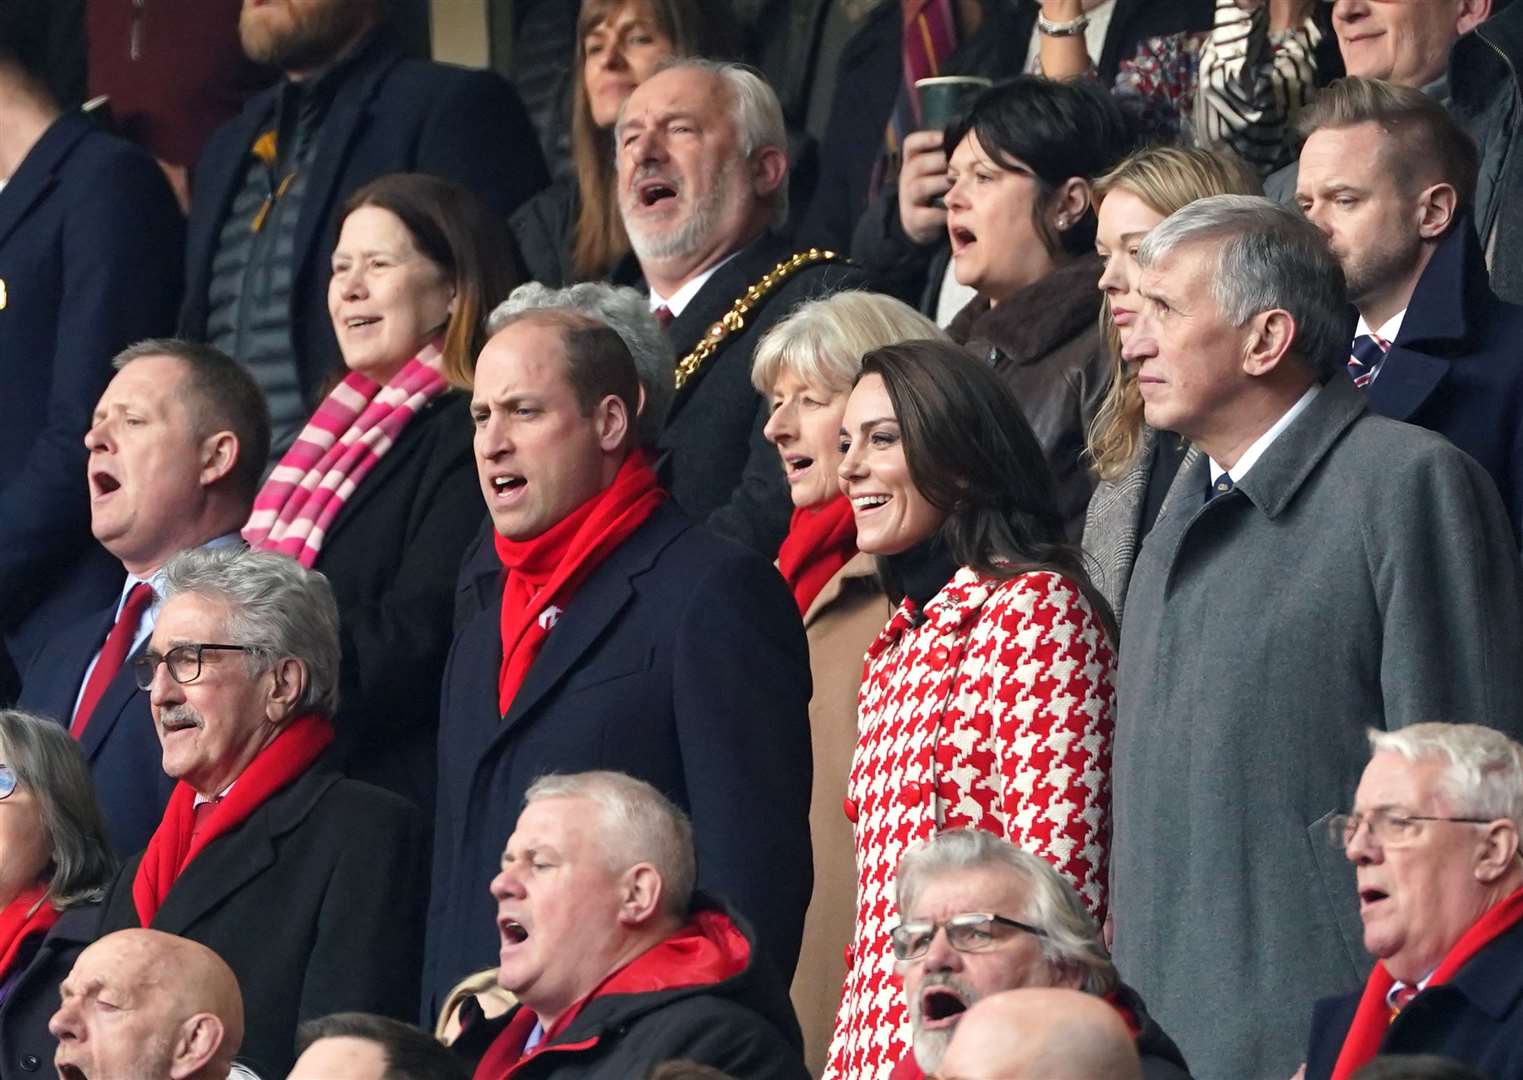 William and Kate supporting different sides at a Six Nations Wales v England match (Joe Giddens/PA)